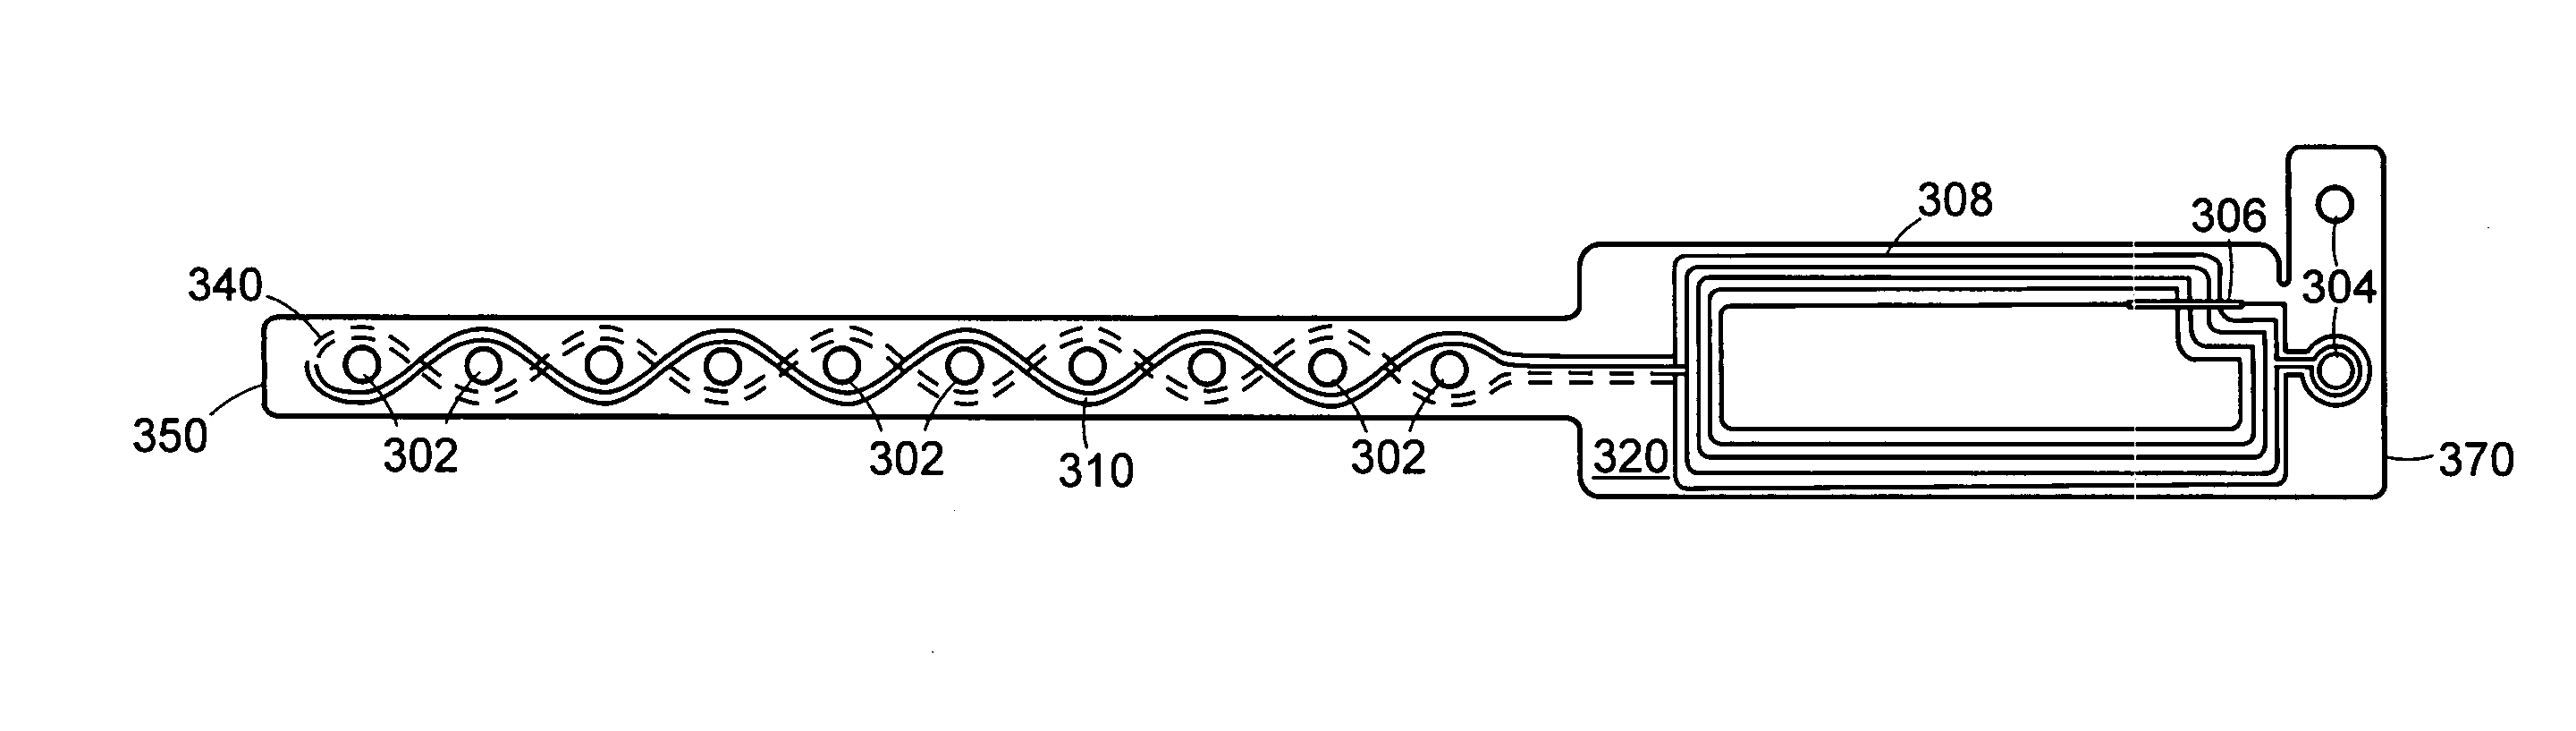 Identification band using serpentine paths to detect tampering